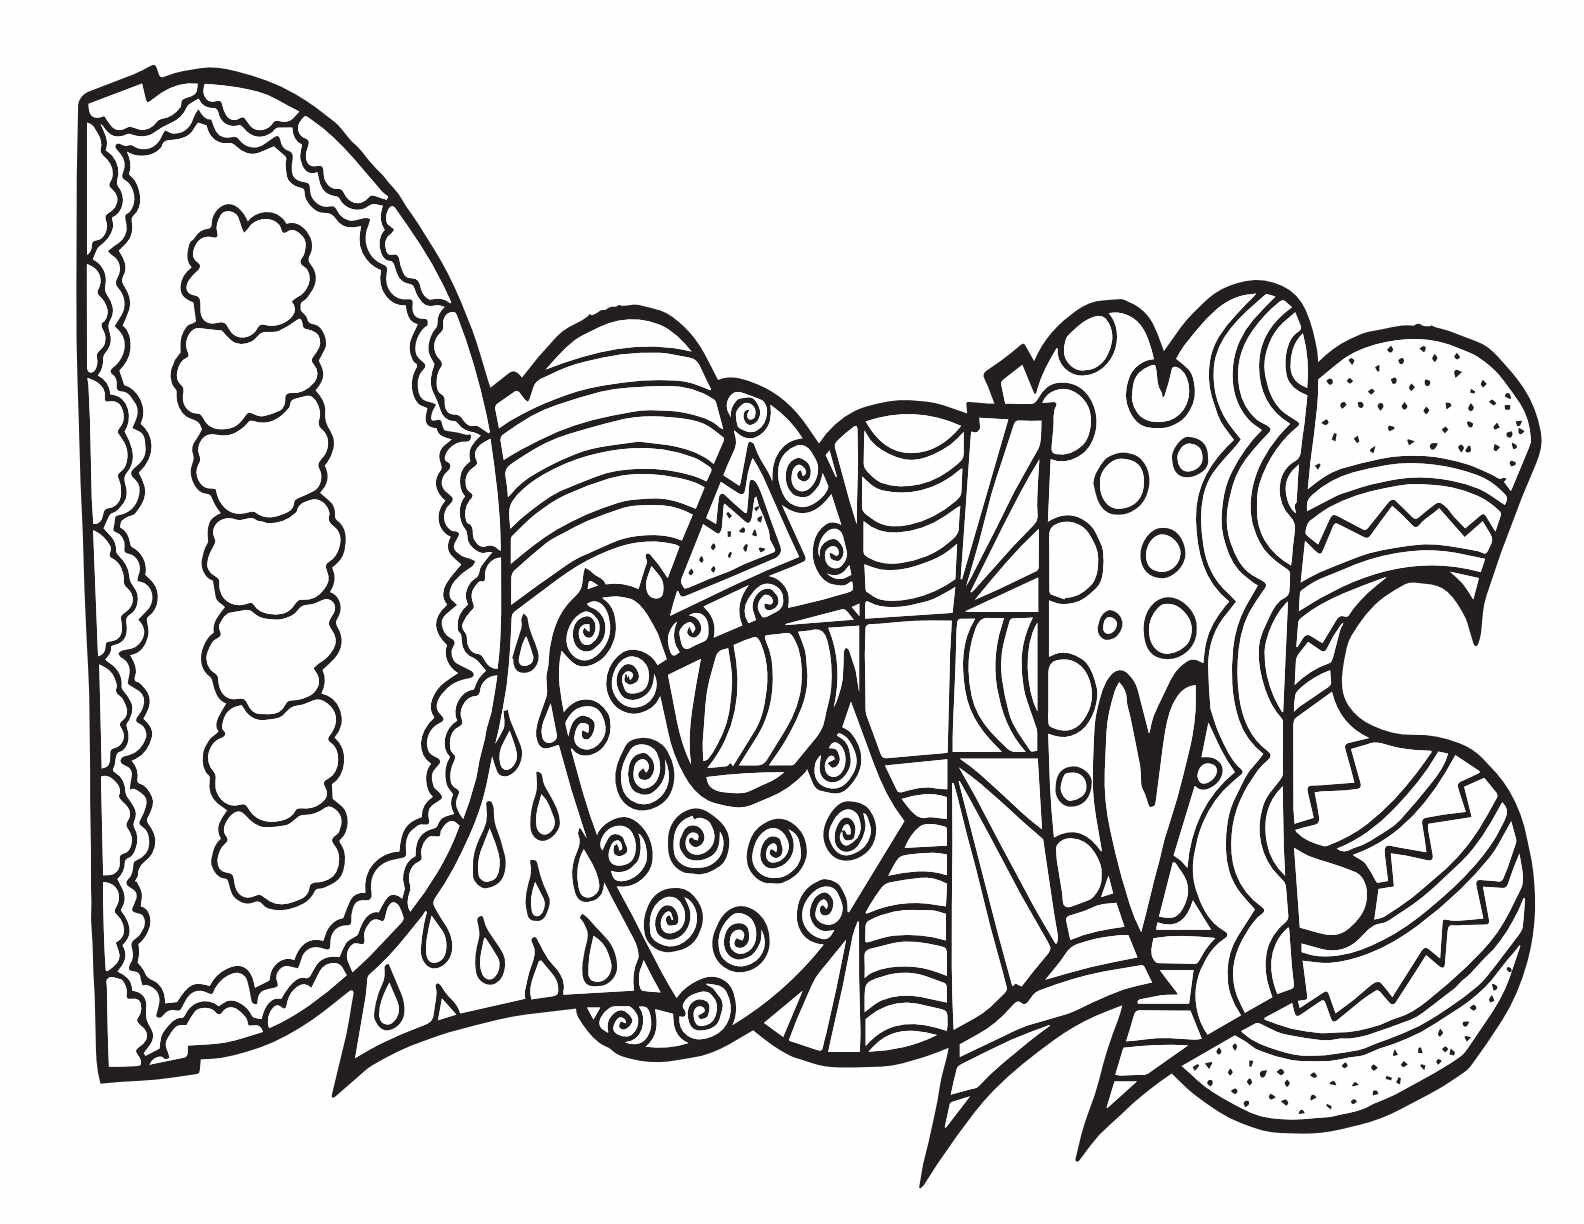 3 Free DREAMS Printable Coloring Page CLICK HERE TO DOWNLOAD THE PAGE ABOVE